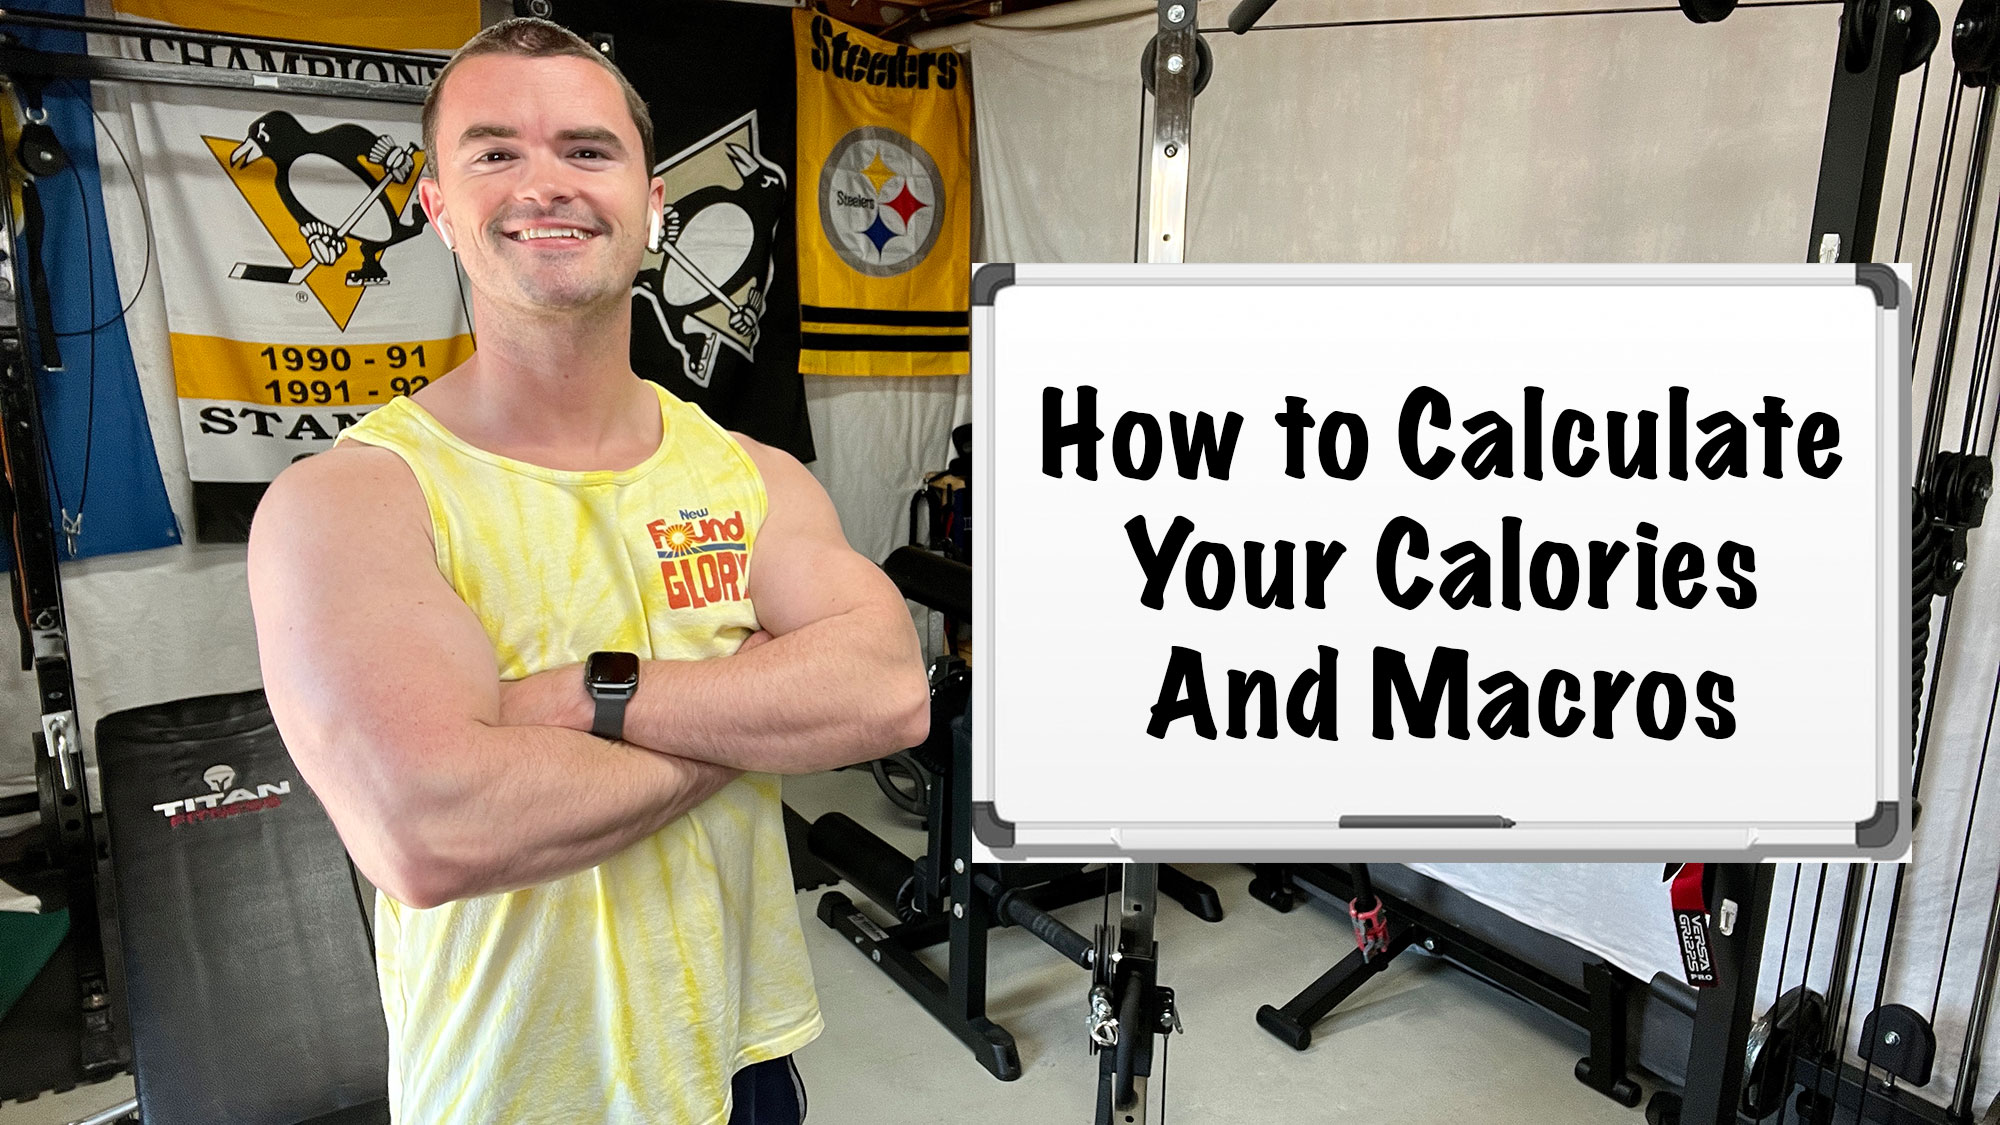 How to Calculate Your Calories and Macros